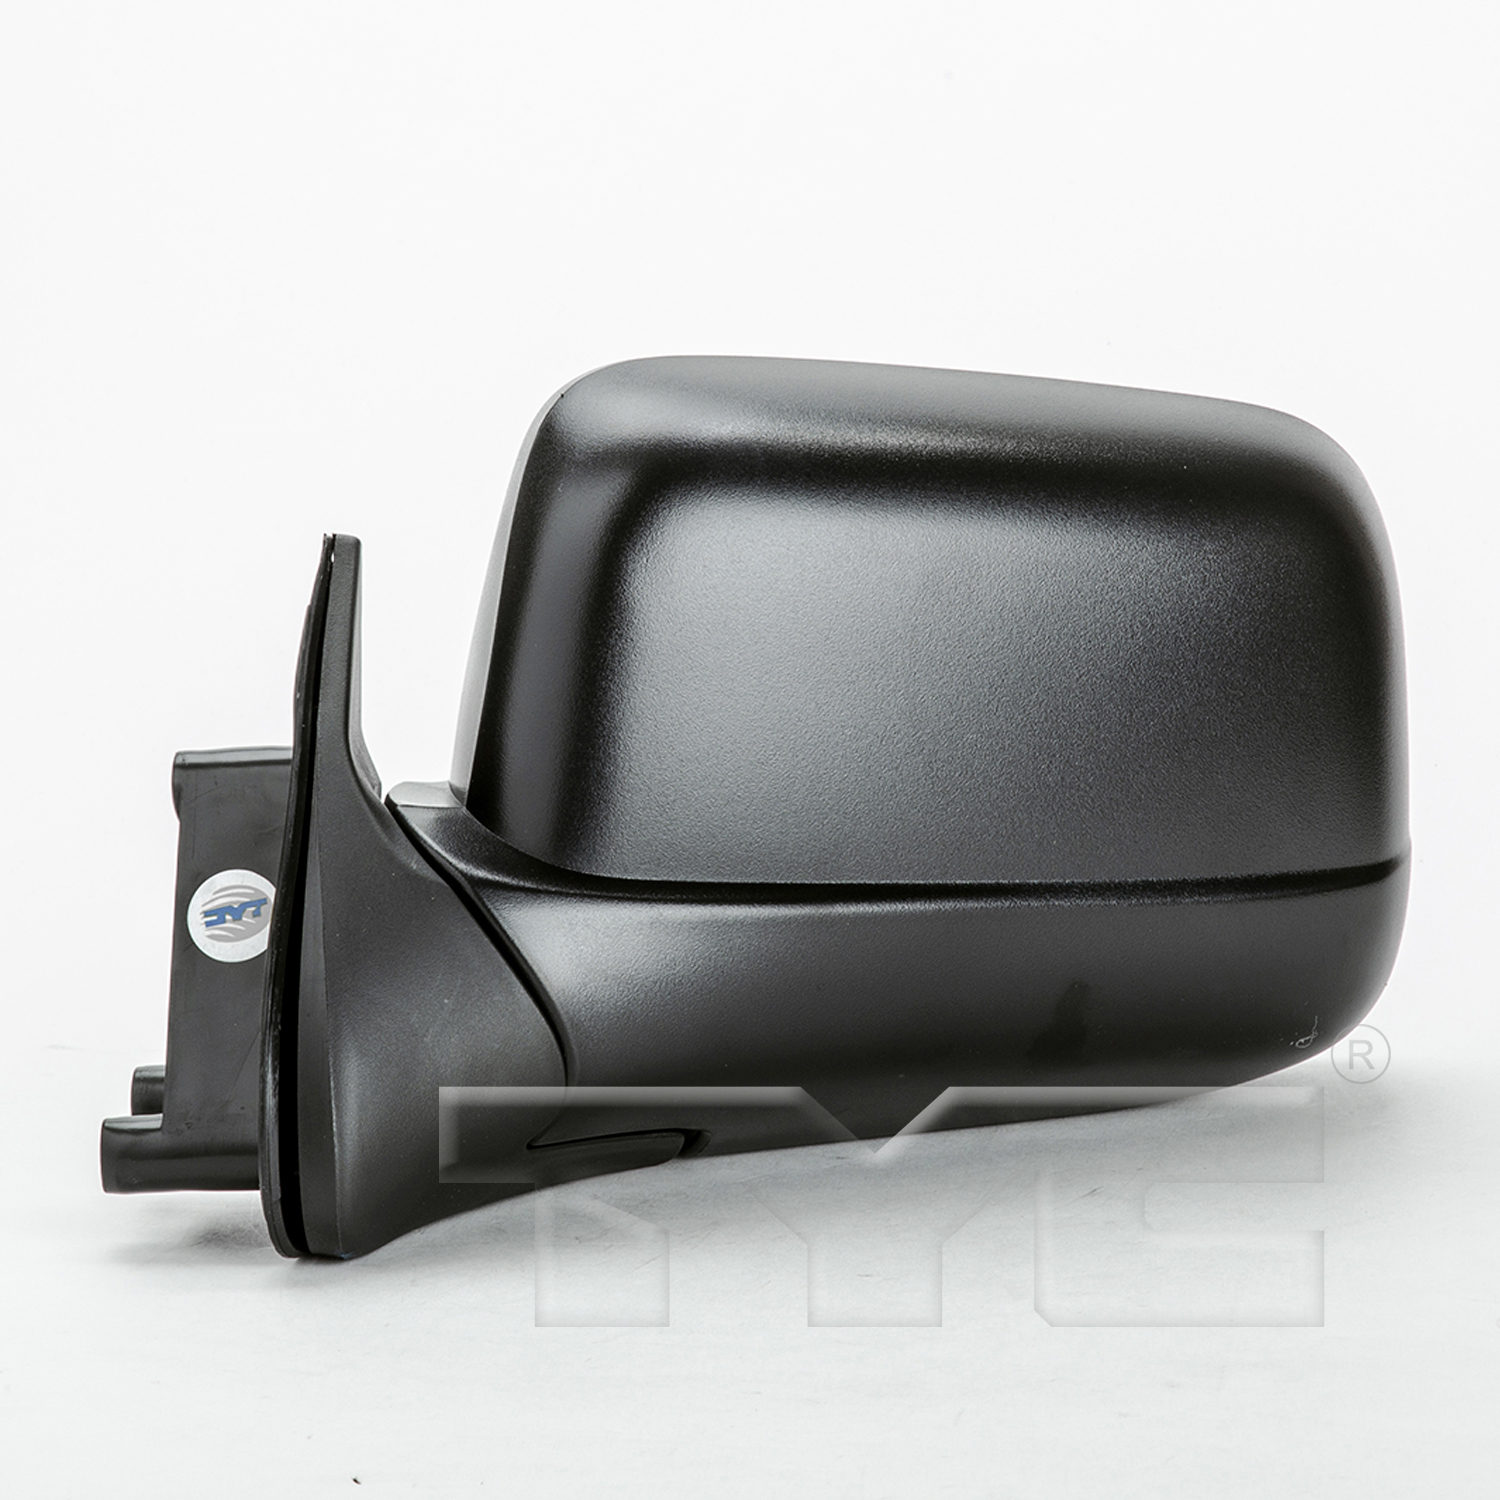 Aftermarket MIRRORS for NISSAN - FRONTIER, FRONTIER,01-04,LT Mirror outside rear view